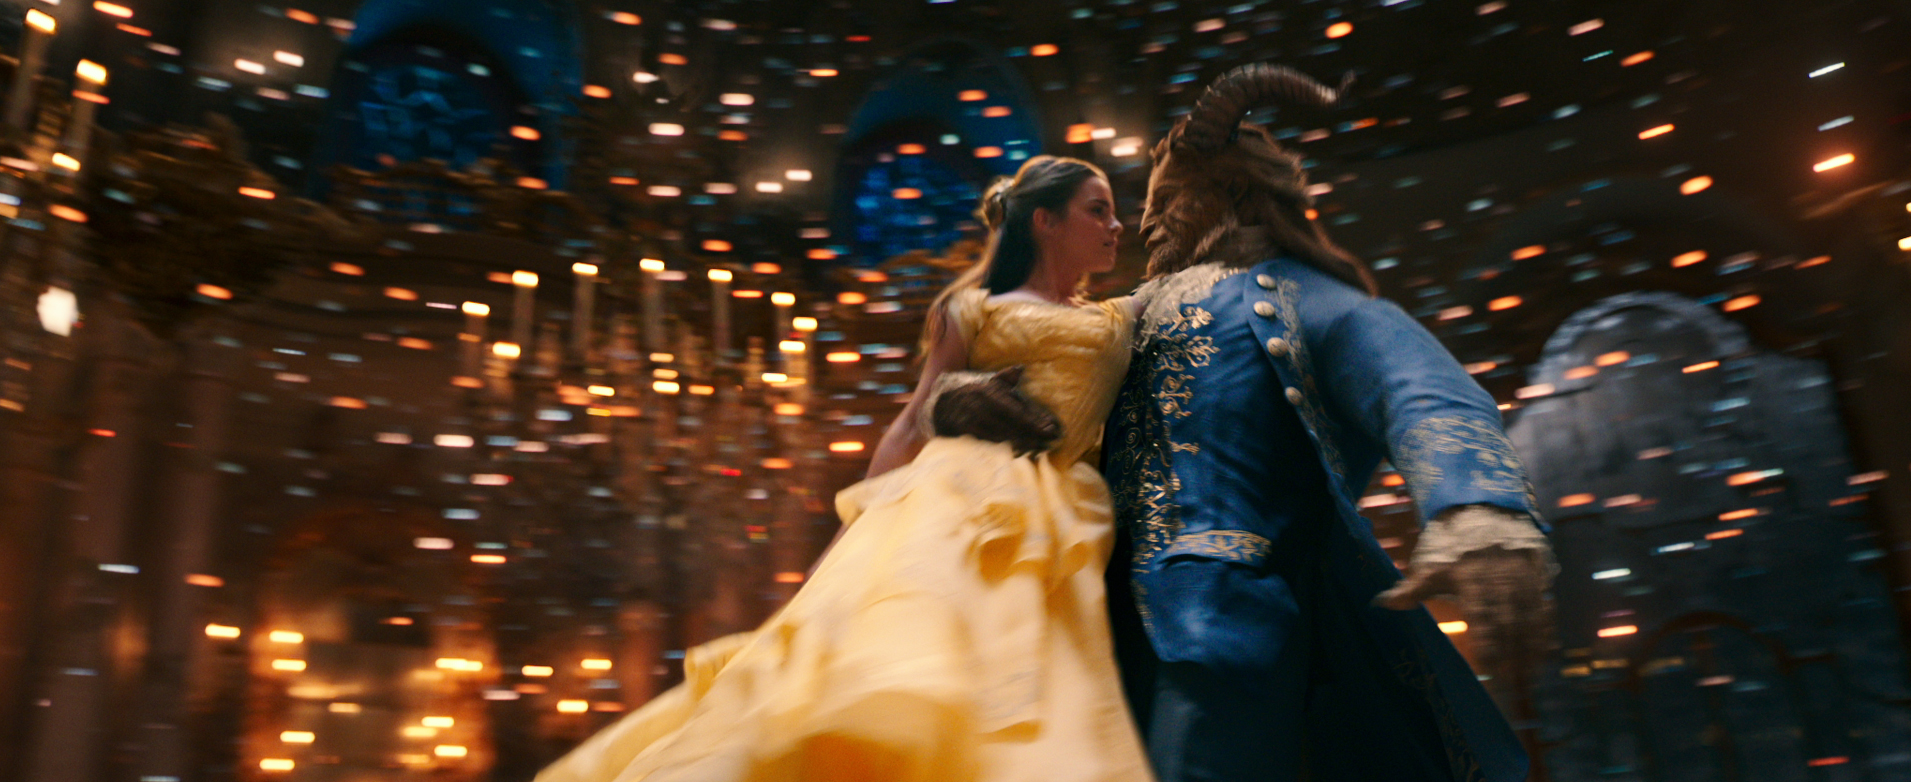 Final Beauty and the Beast Trailer Released by Disney